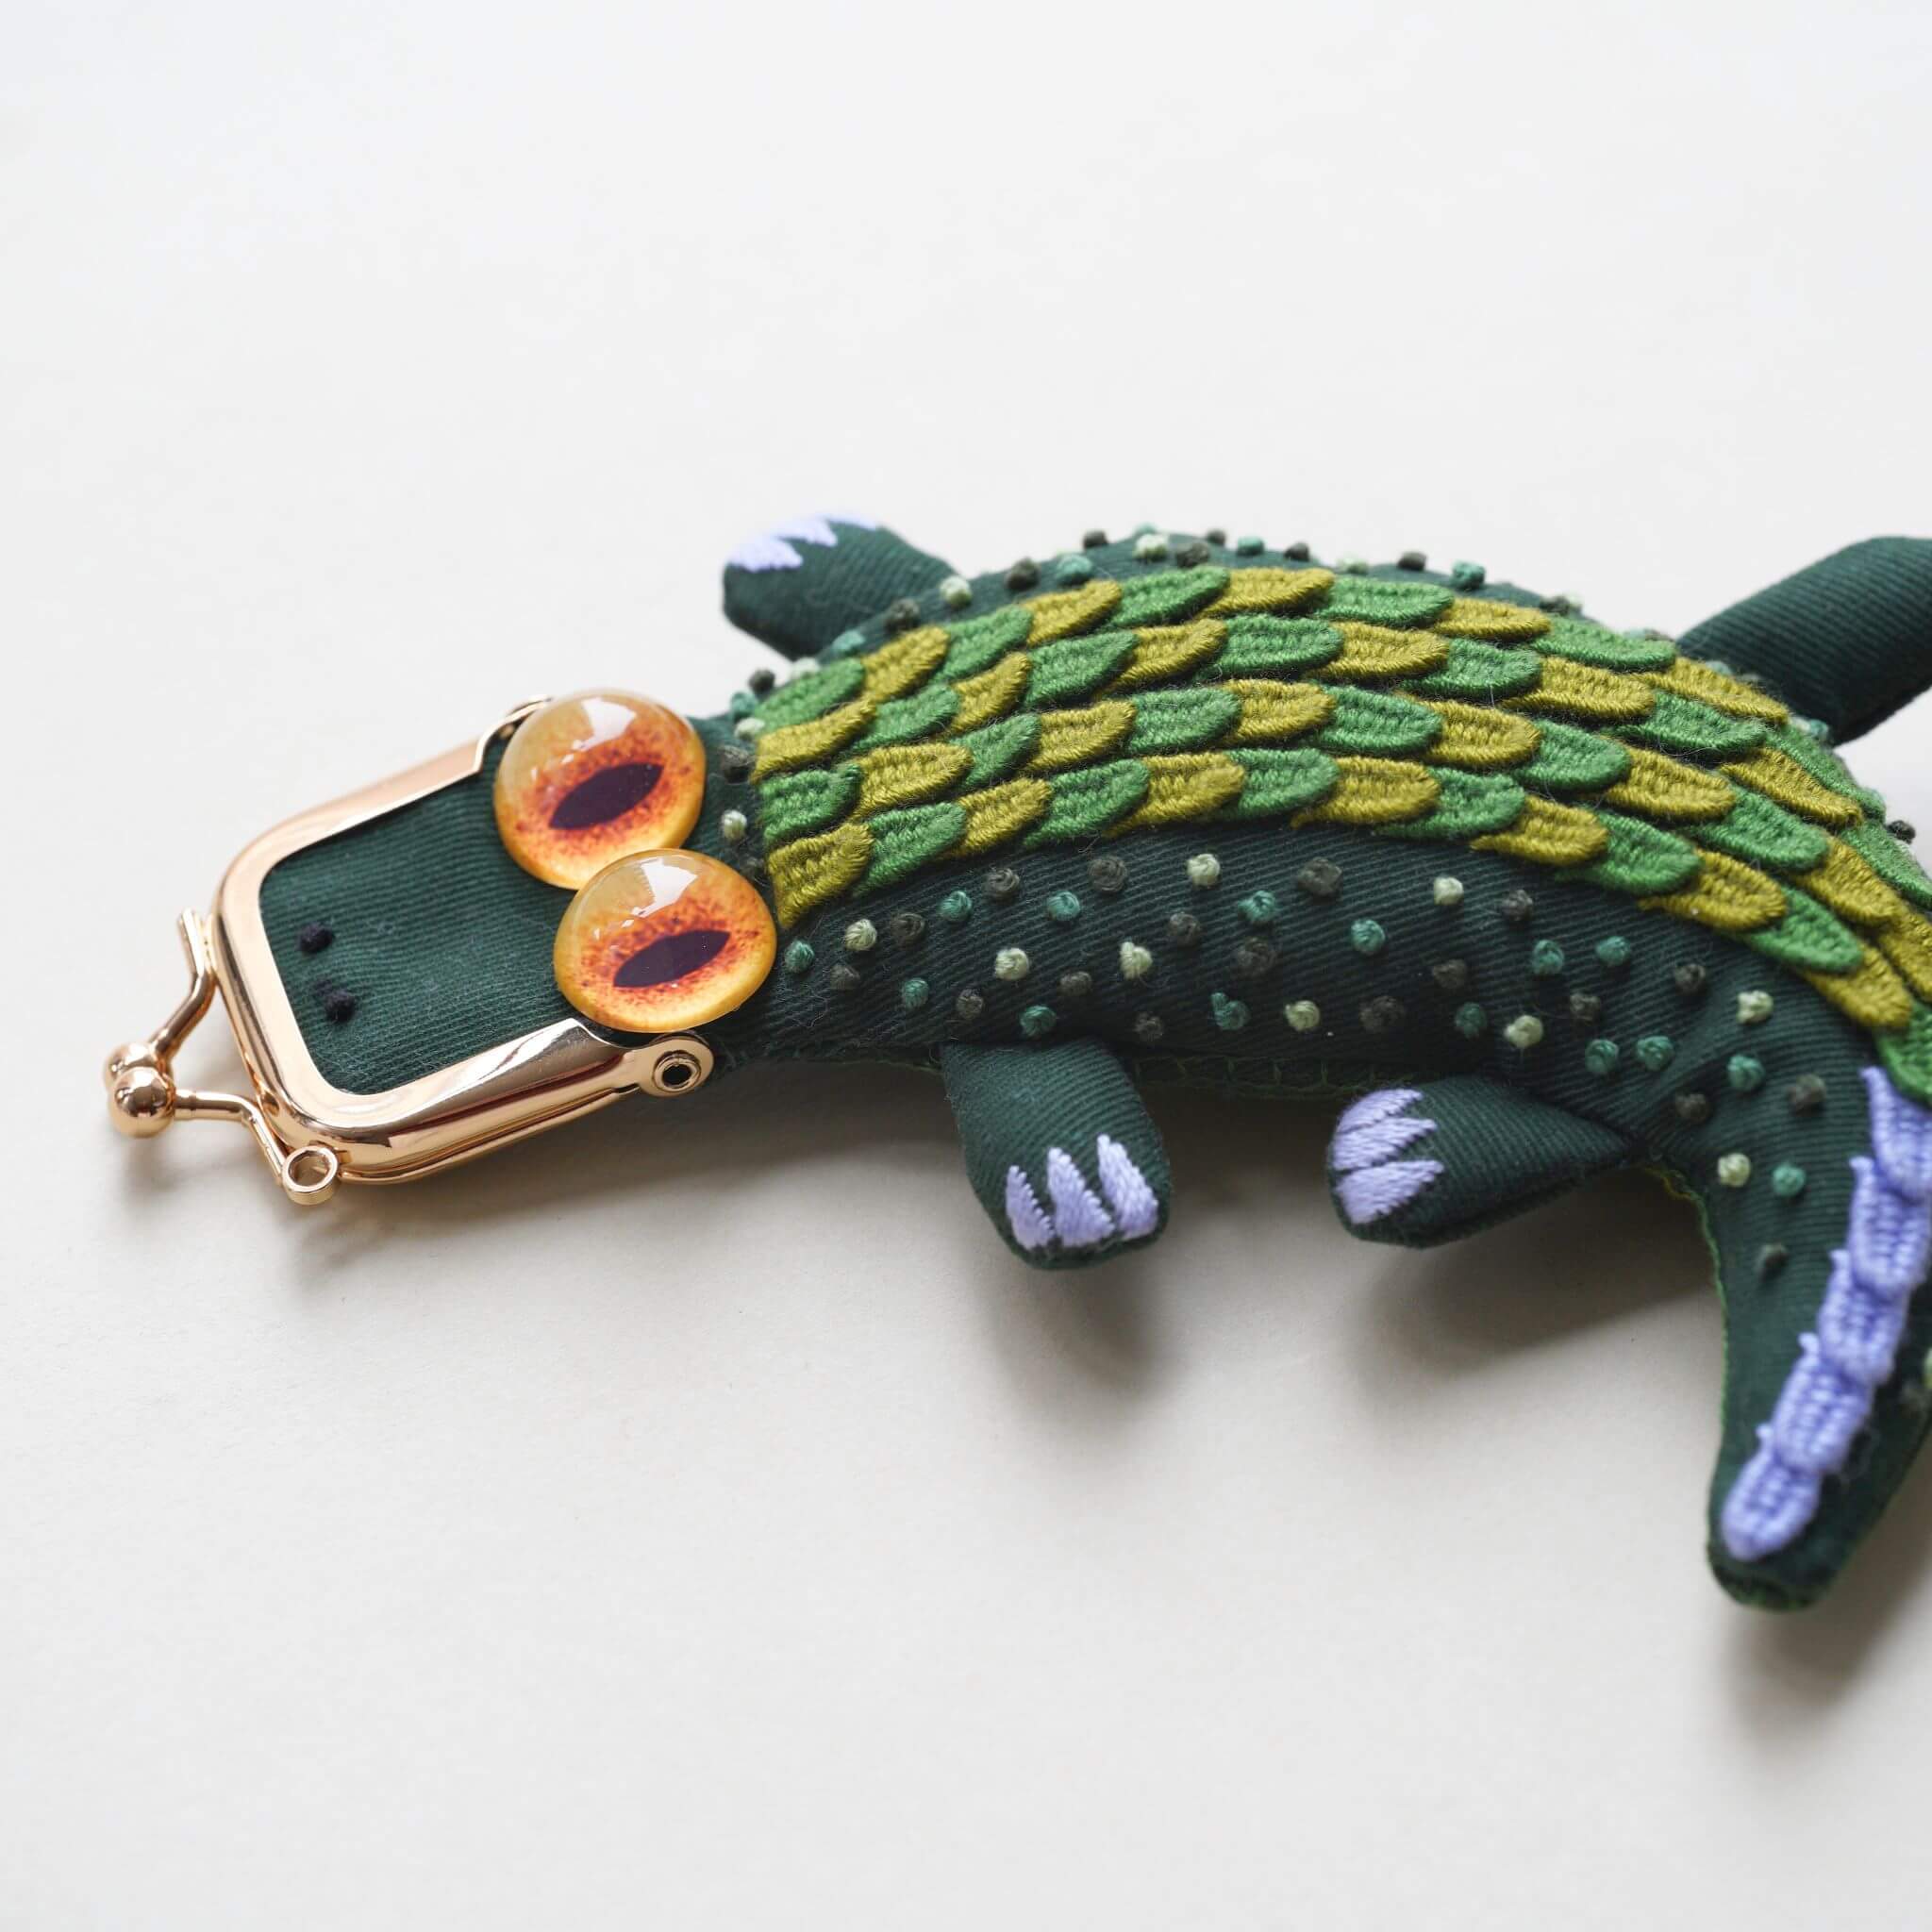 Crocodile BagEmbroidery DIY Kit for Beginners, Unique Auspicious Fabric sachet with auspicious cicada design. Free international delivery for orders over $100.